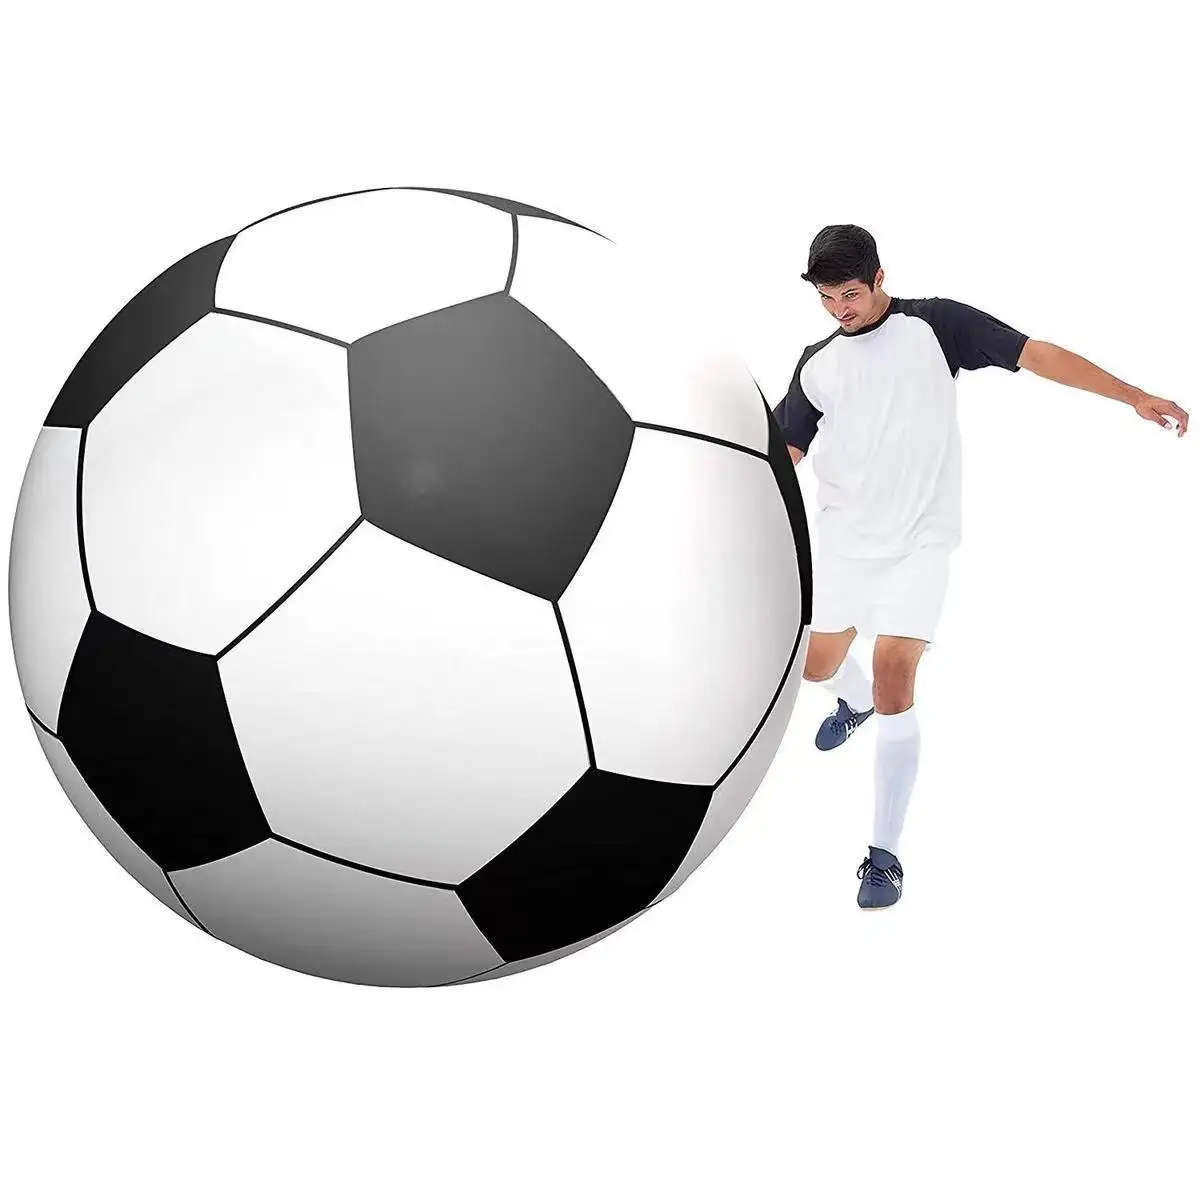 Football Outdoor Party Kids Toys 100cm/180cm 14 Model Giant Inflatable Bea - $20.77+